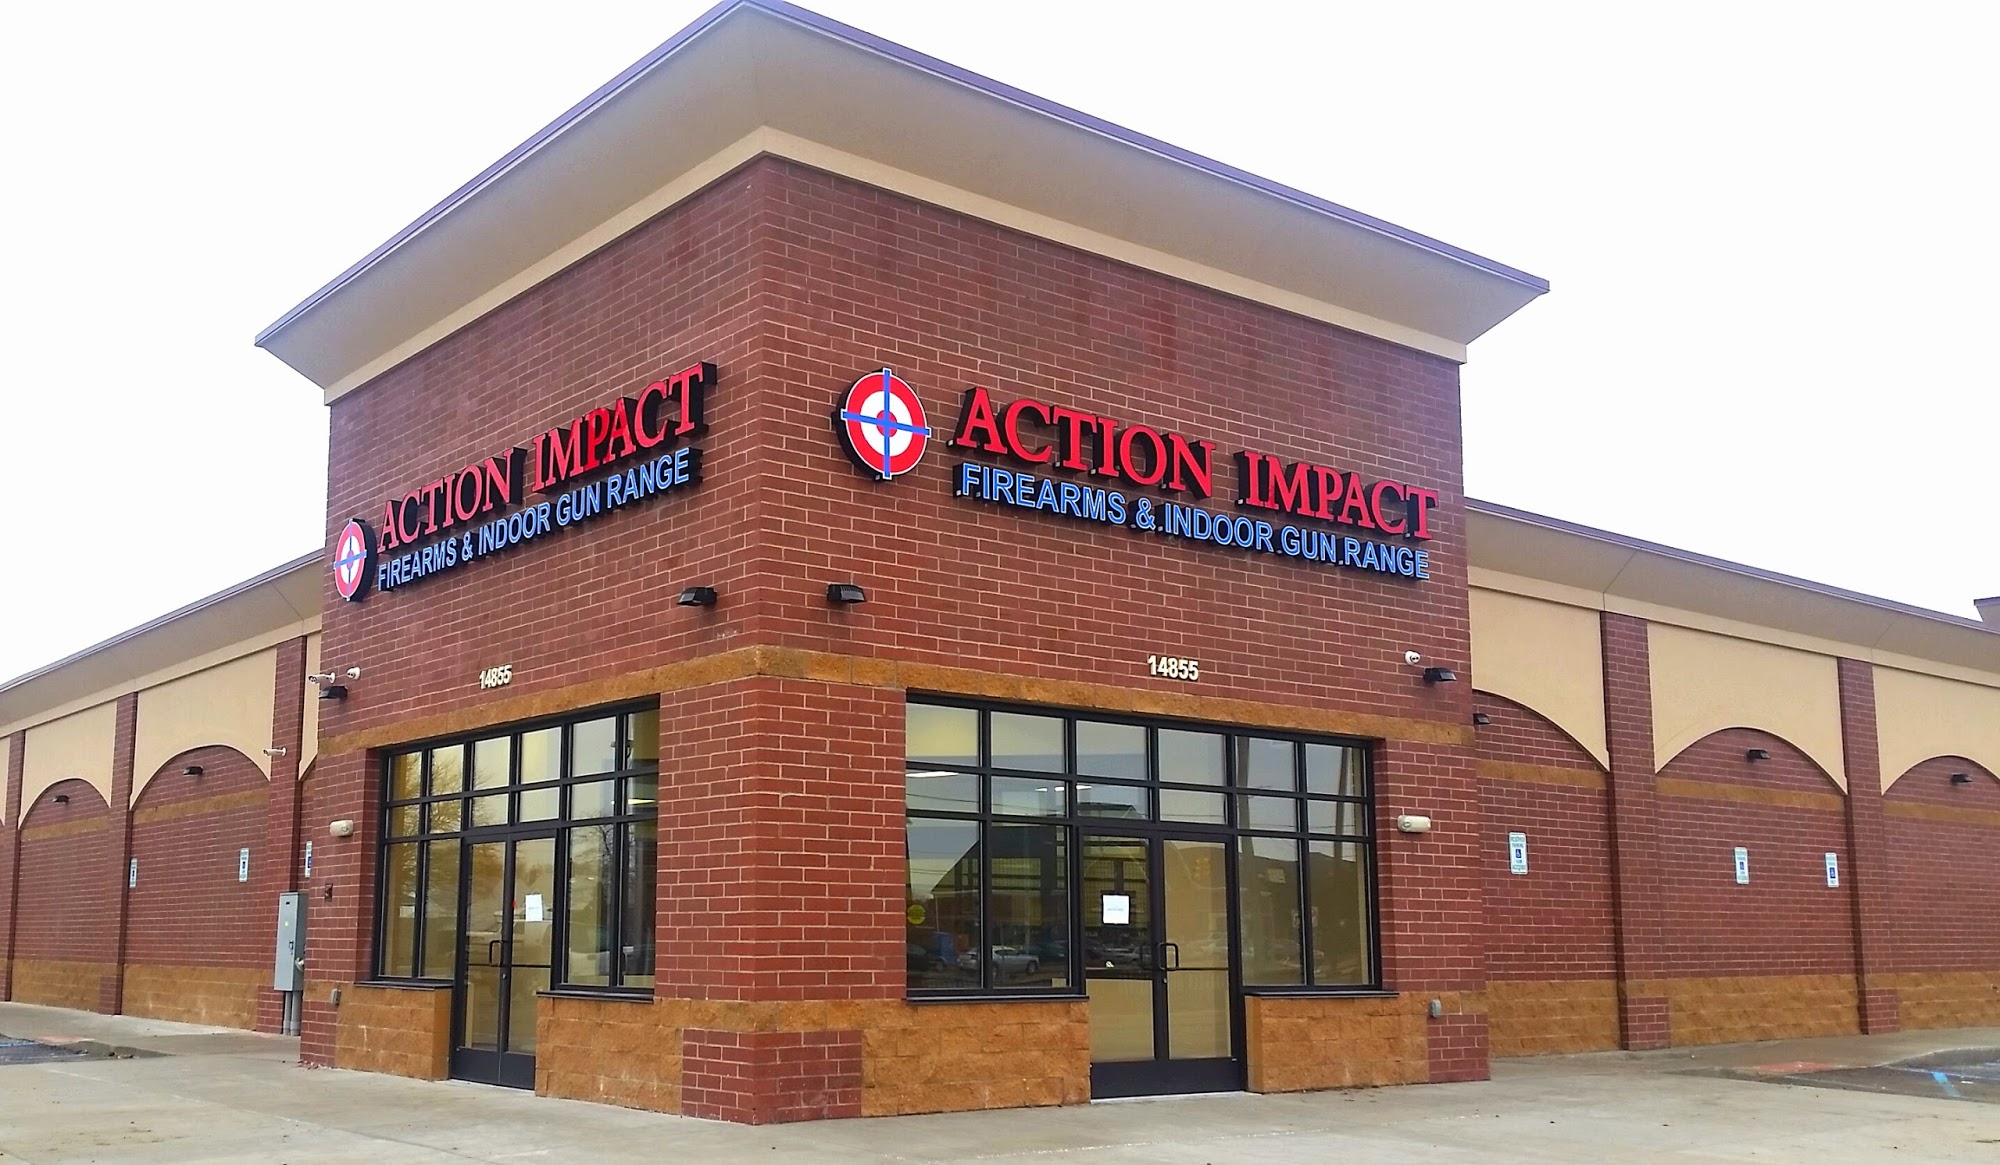 Action Impact Firearms & Training Center